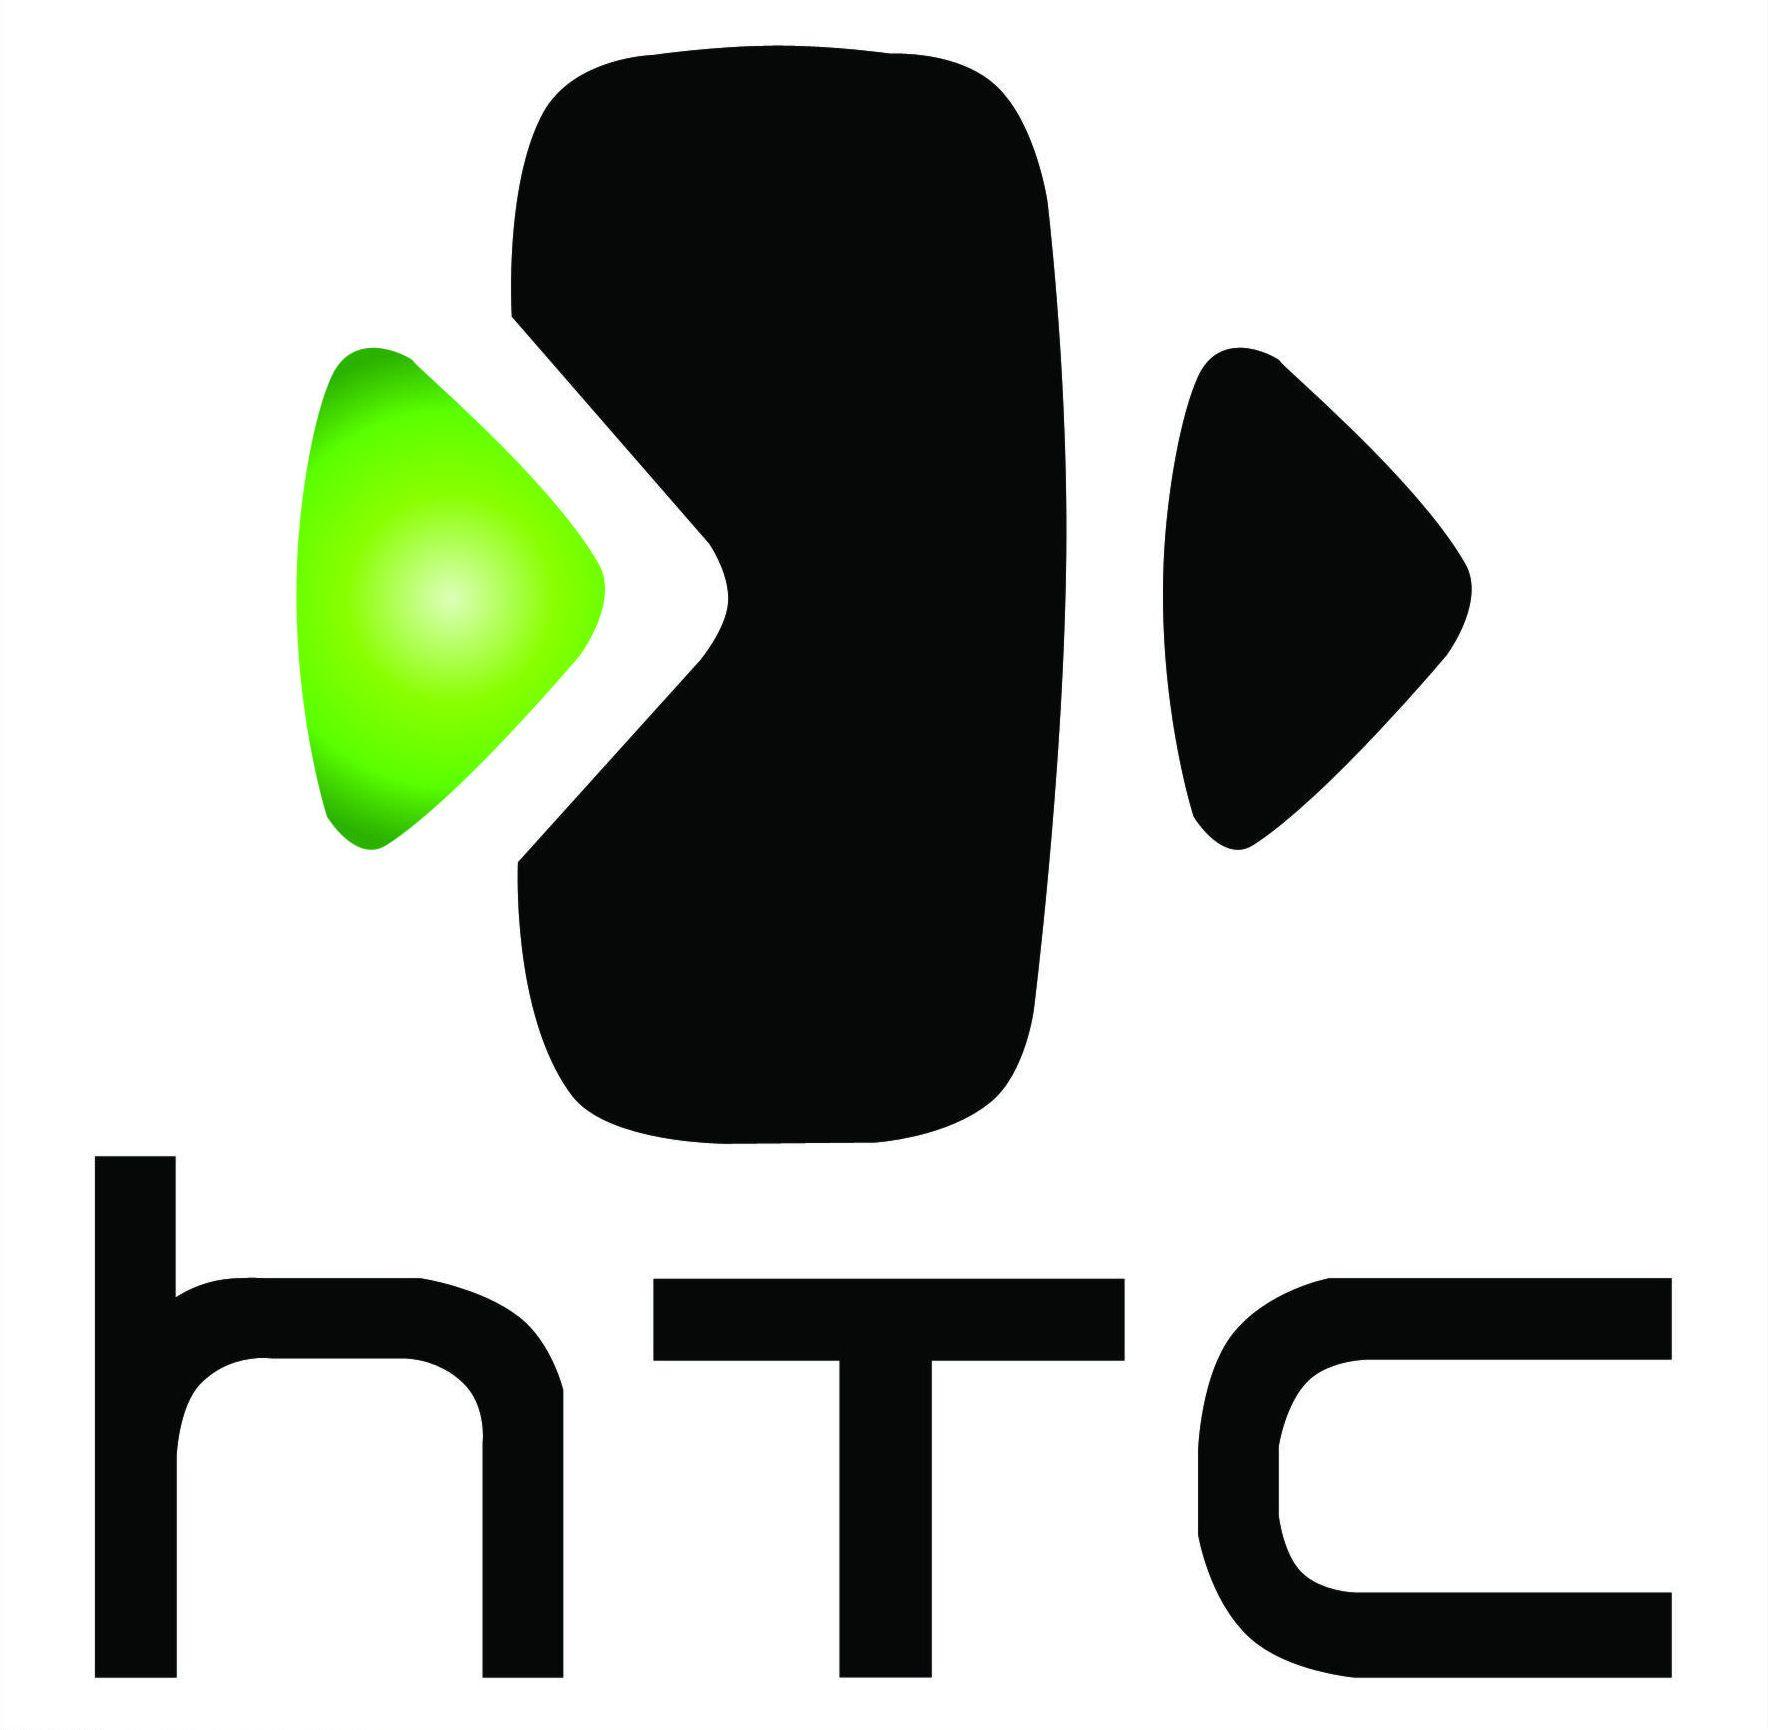 HTC Phone Logo - HTC Hopes To Send Its Vive VR Headset To Chinese Internet Cafes